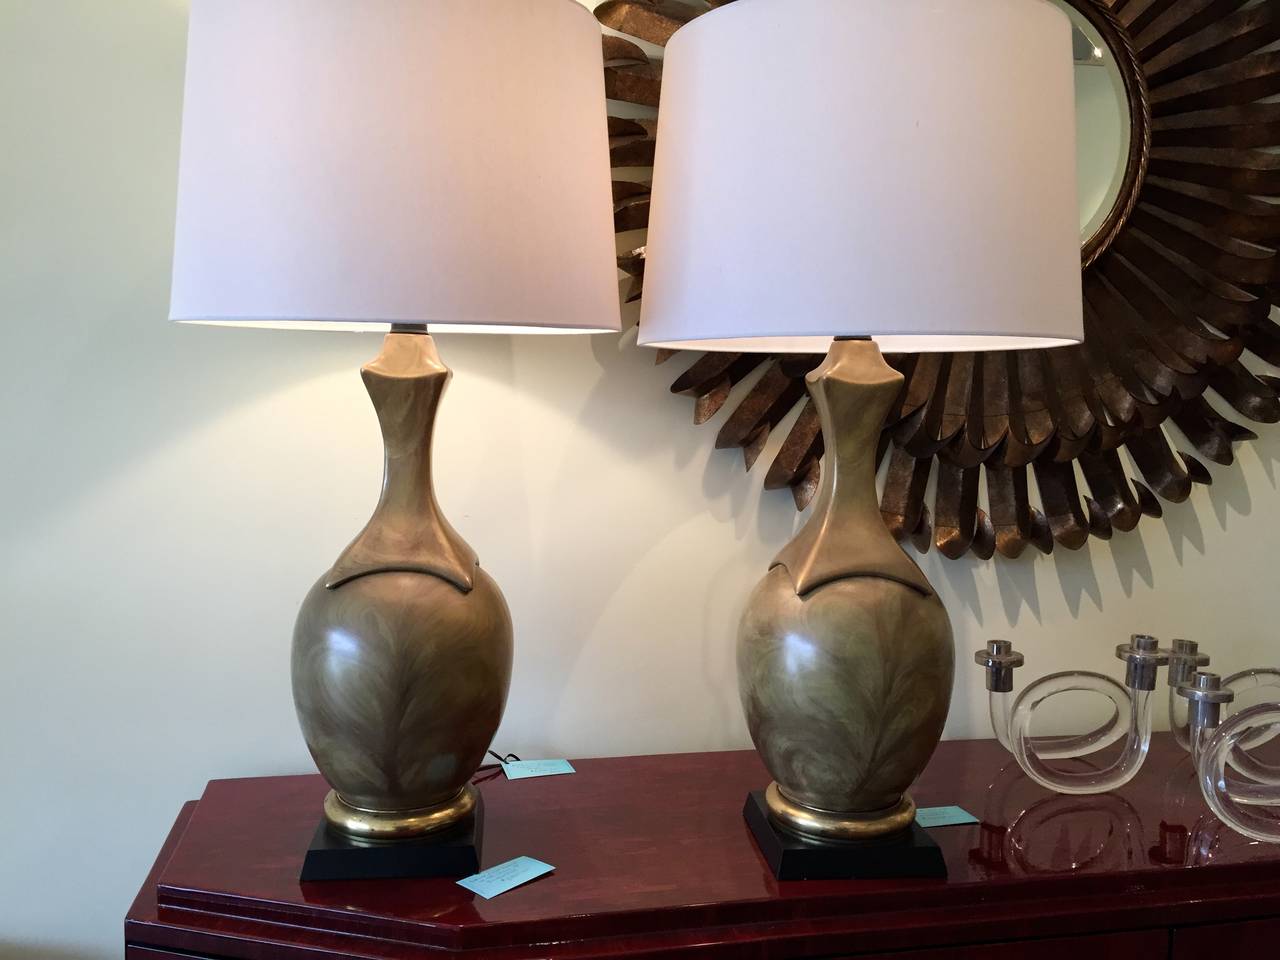 These important lamps are beautifully executed with a handsome and interesting glaze. They are ceramic, and mounted on a black wooden base accented by a band of brass.

They measure 28